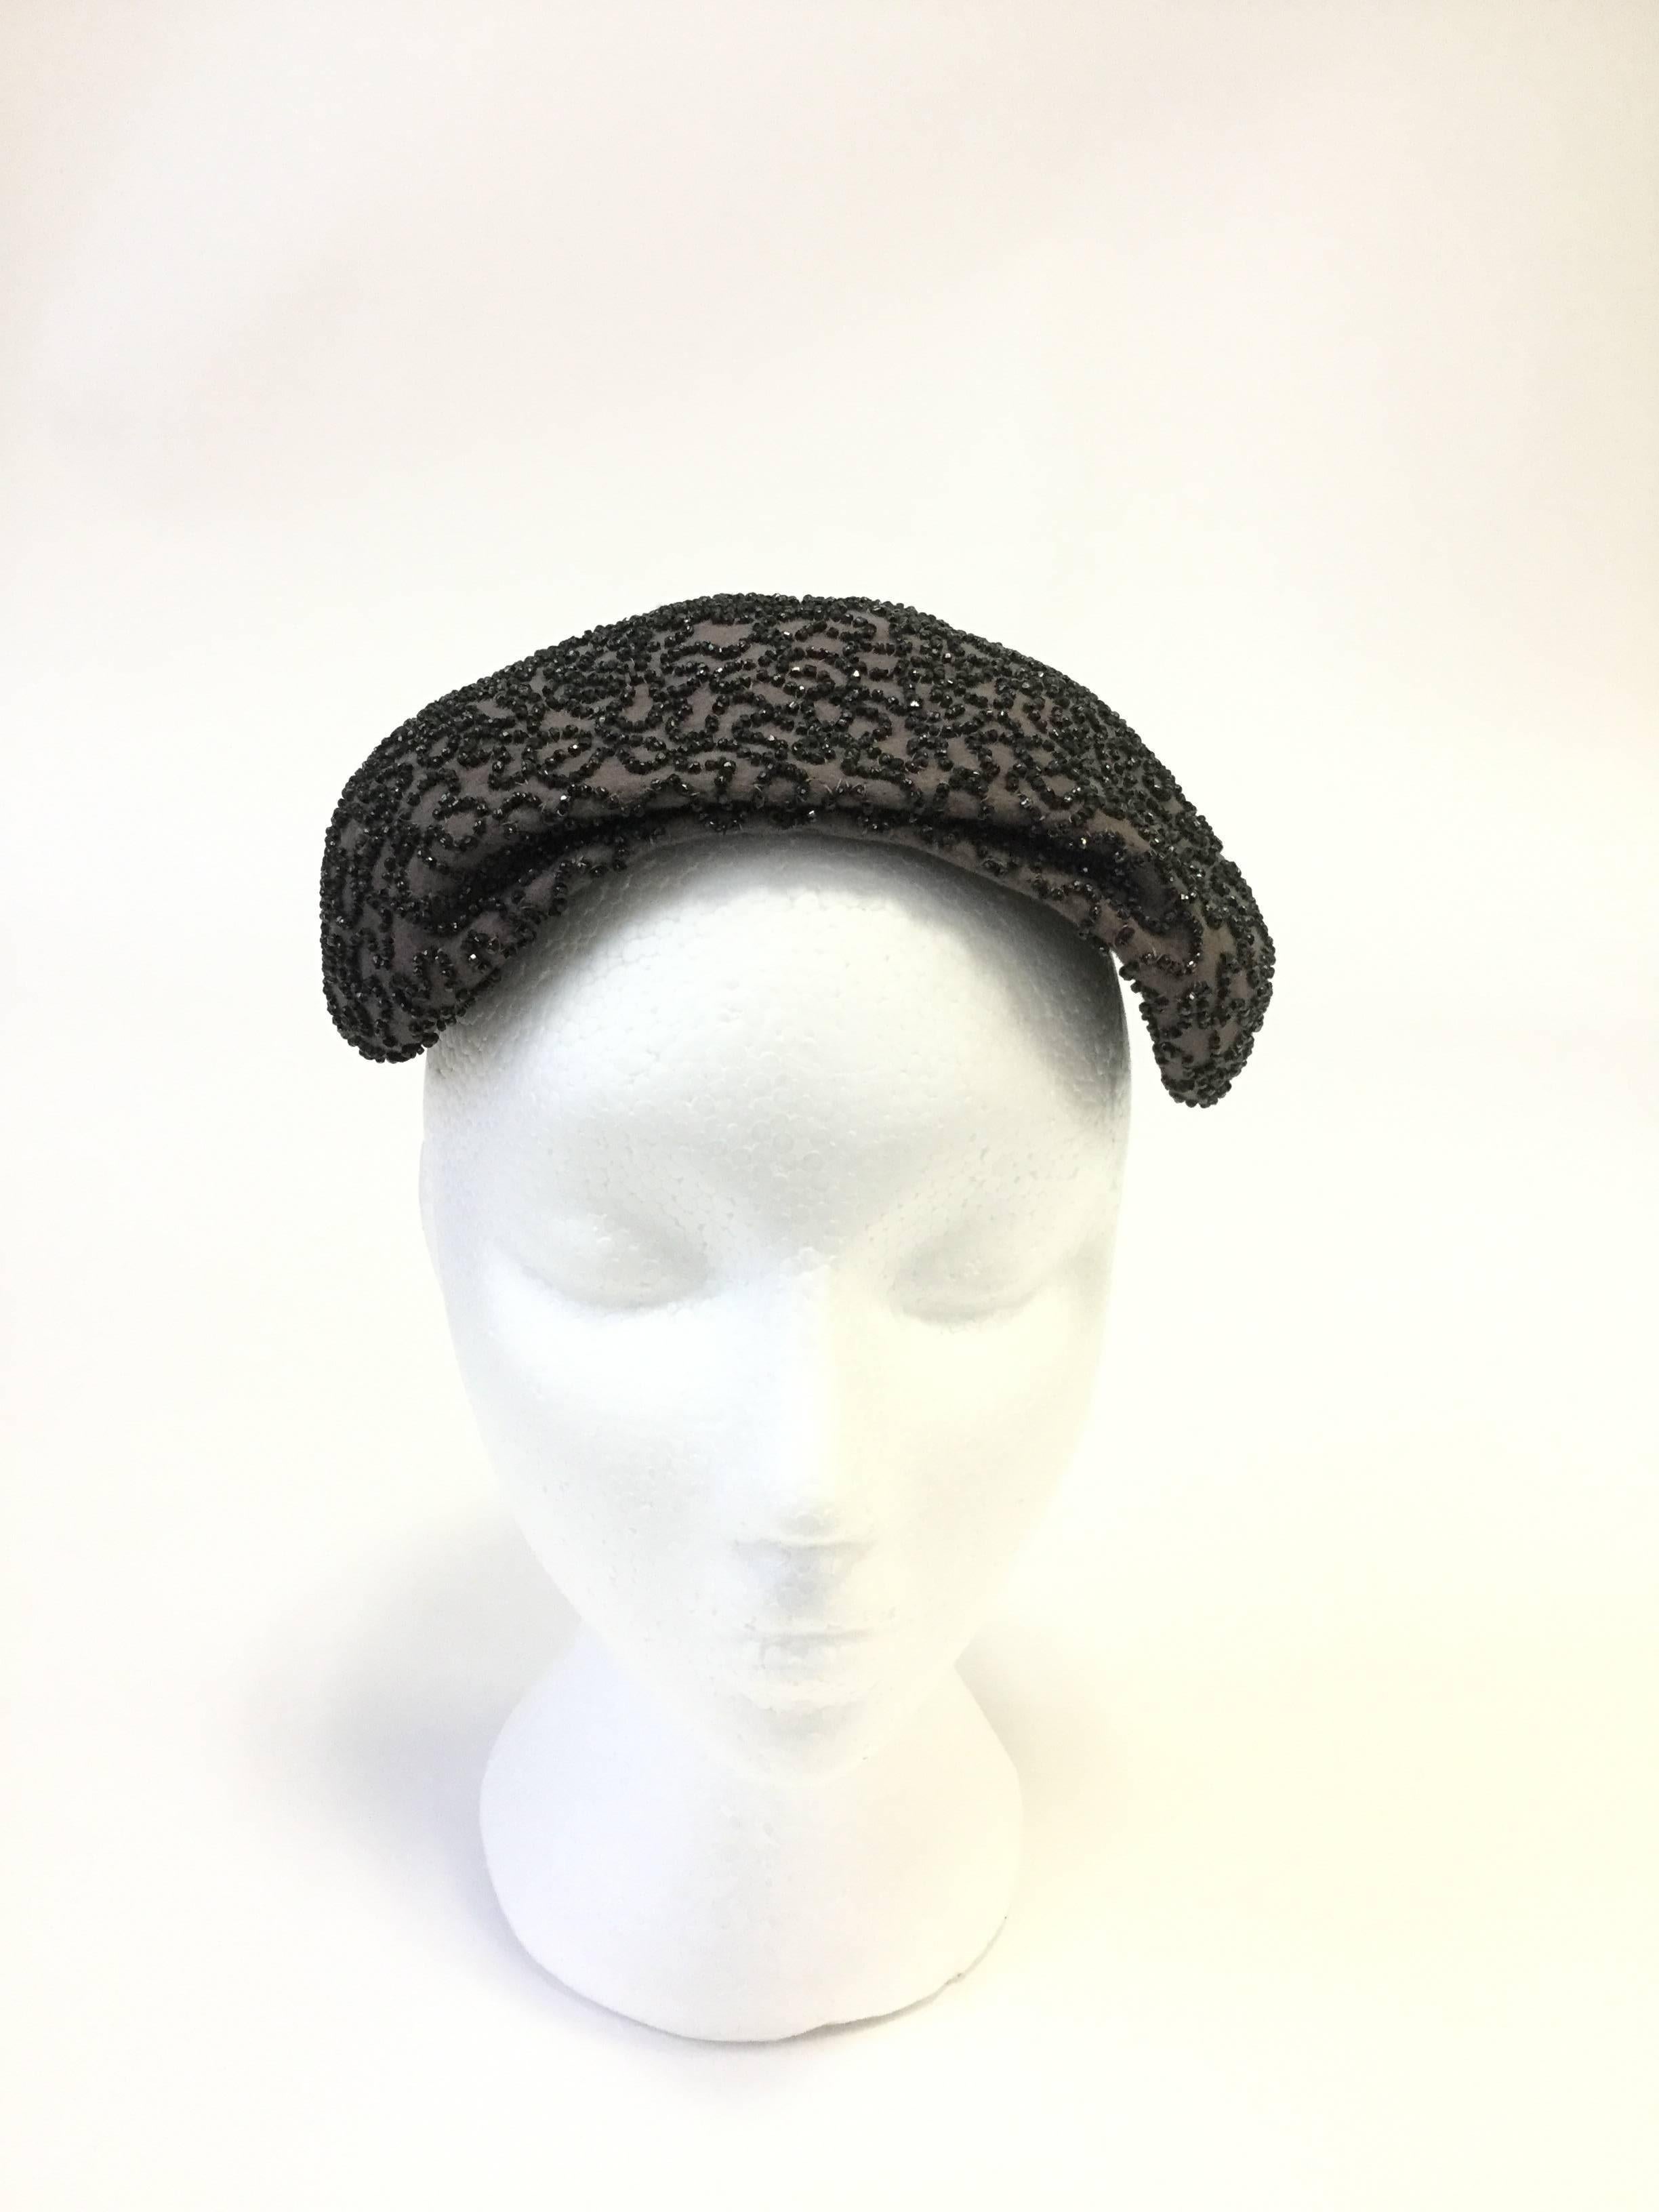 
Striking hand beaded hat by The Fair! This elegant capulet evening hat curves gently around the wearers head, the front slouching slightly in a relaxed brim. The cap is fully beaded in an undulating wave pattern that brings to mind the organic